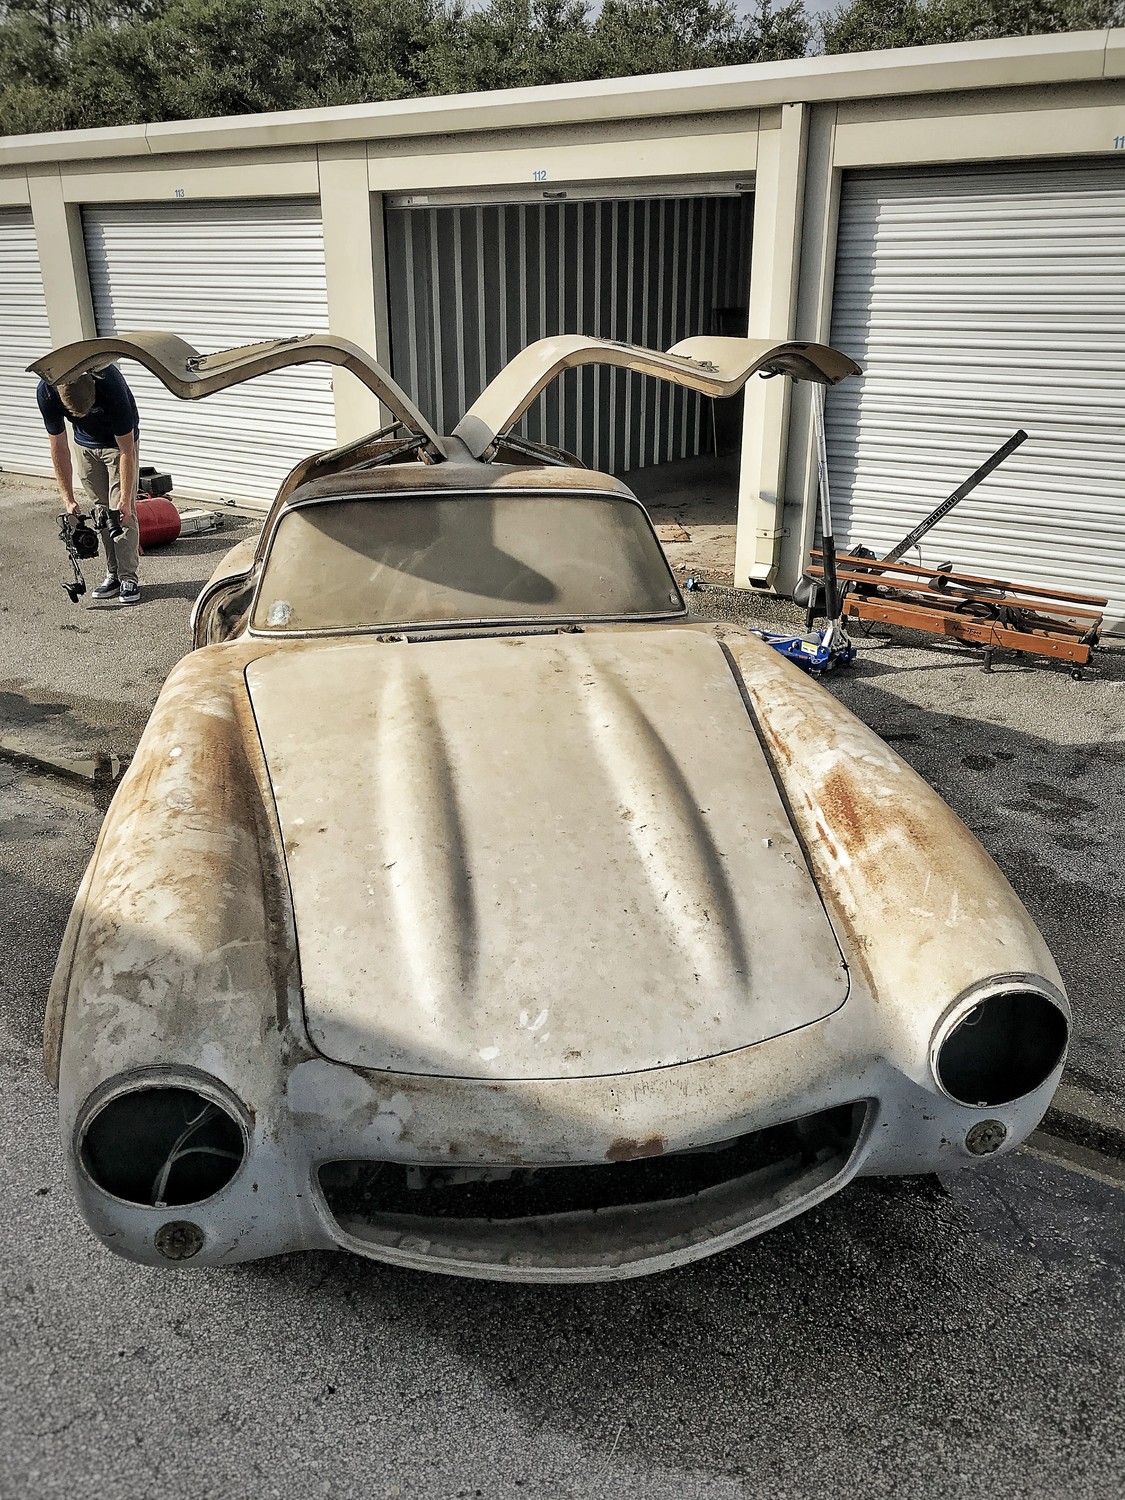 The 1954 Mercedes-Benz 300SL Gullwing Coupe is displayed as it was discovered in the Ponte Vedra storage unit. The Gullwing will be shown at the Amelia Island Concours d’ Elegance, which takes place March 7-10.